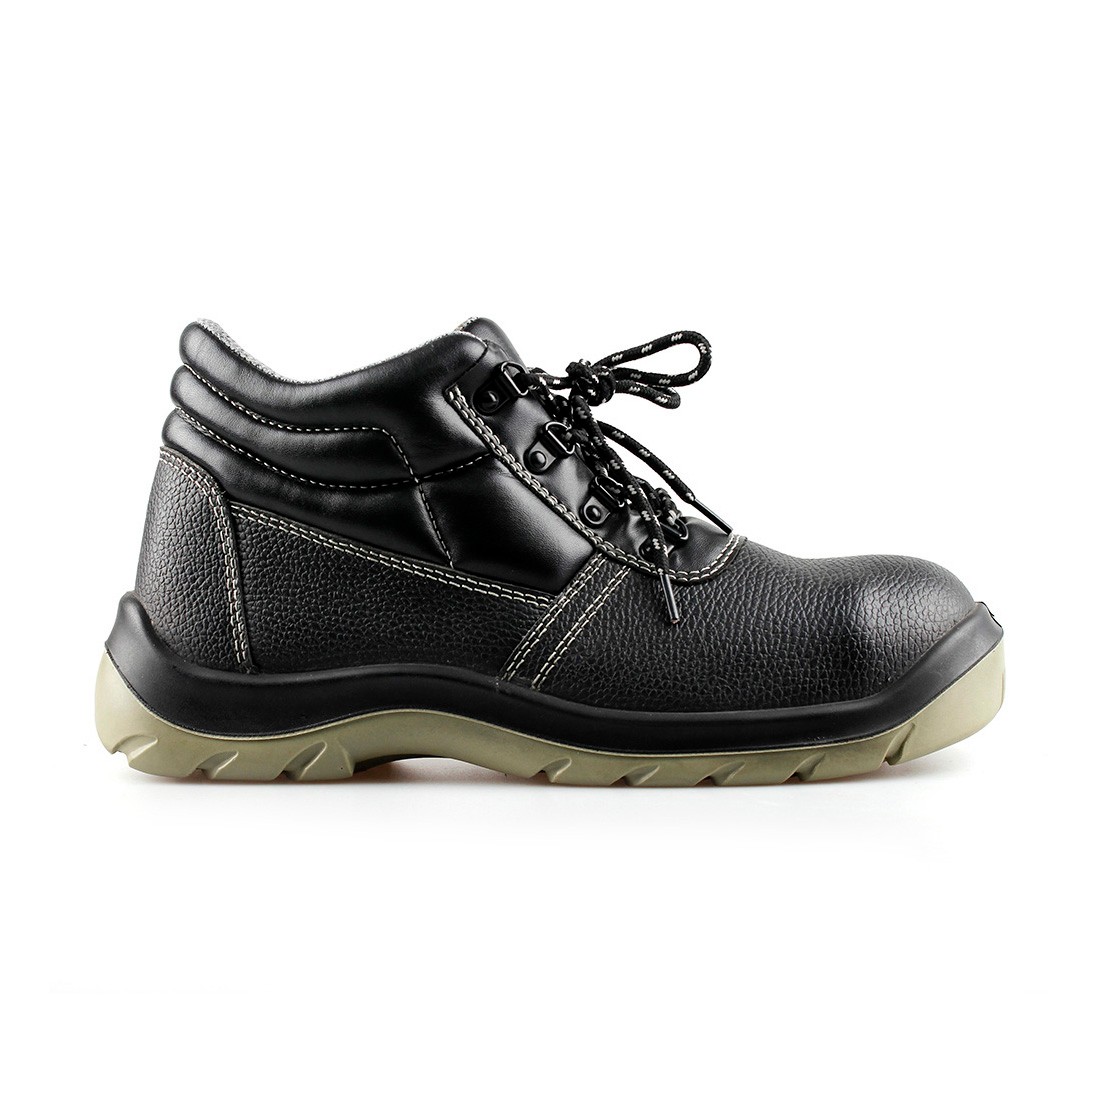 basic middle cut safety shoes with steel toecap and steel midsole(SN5732)